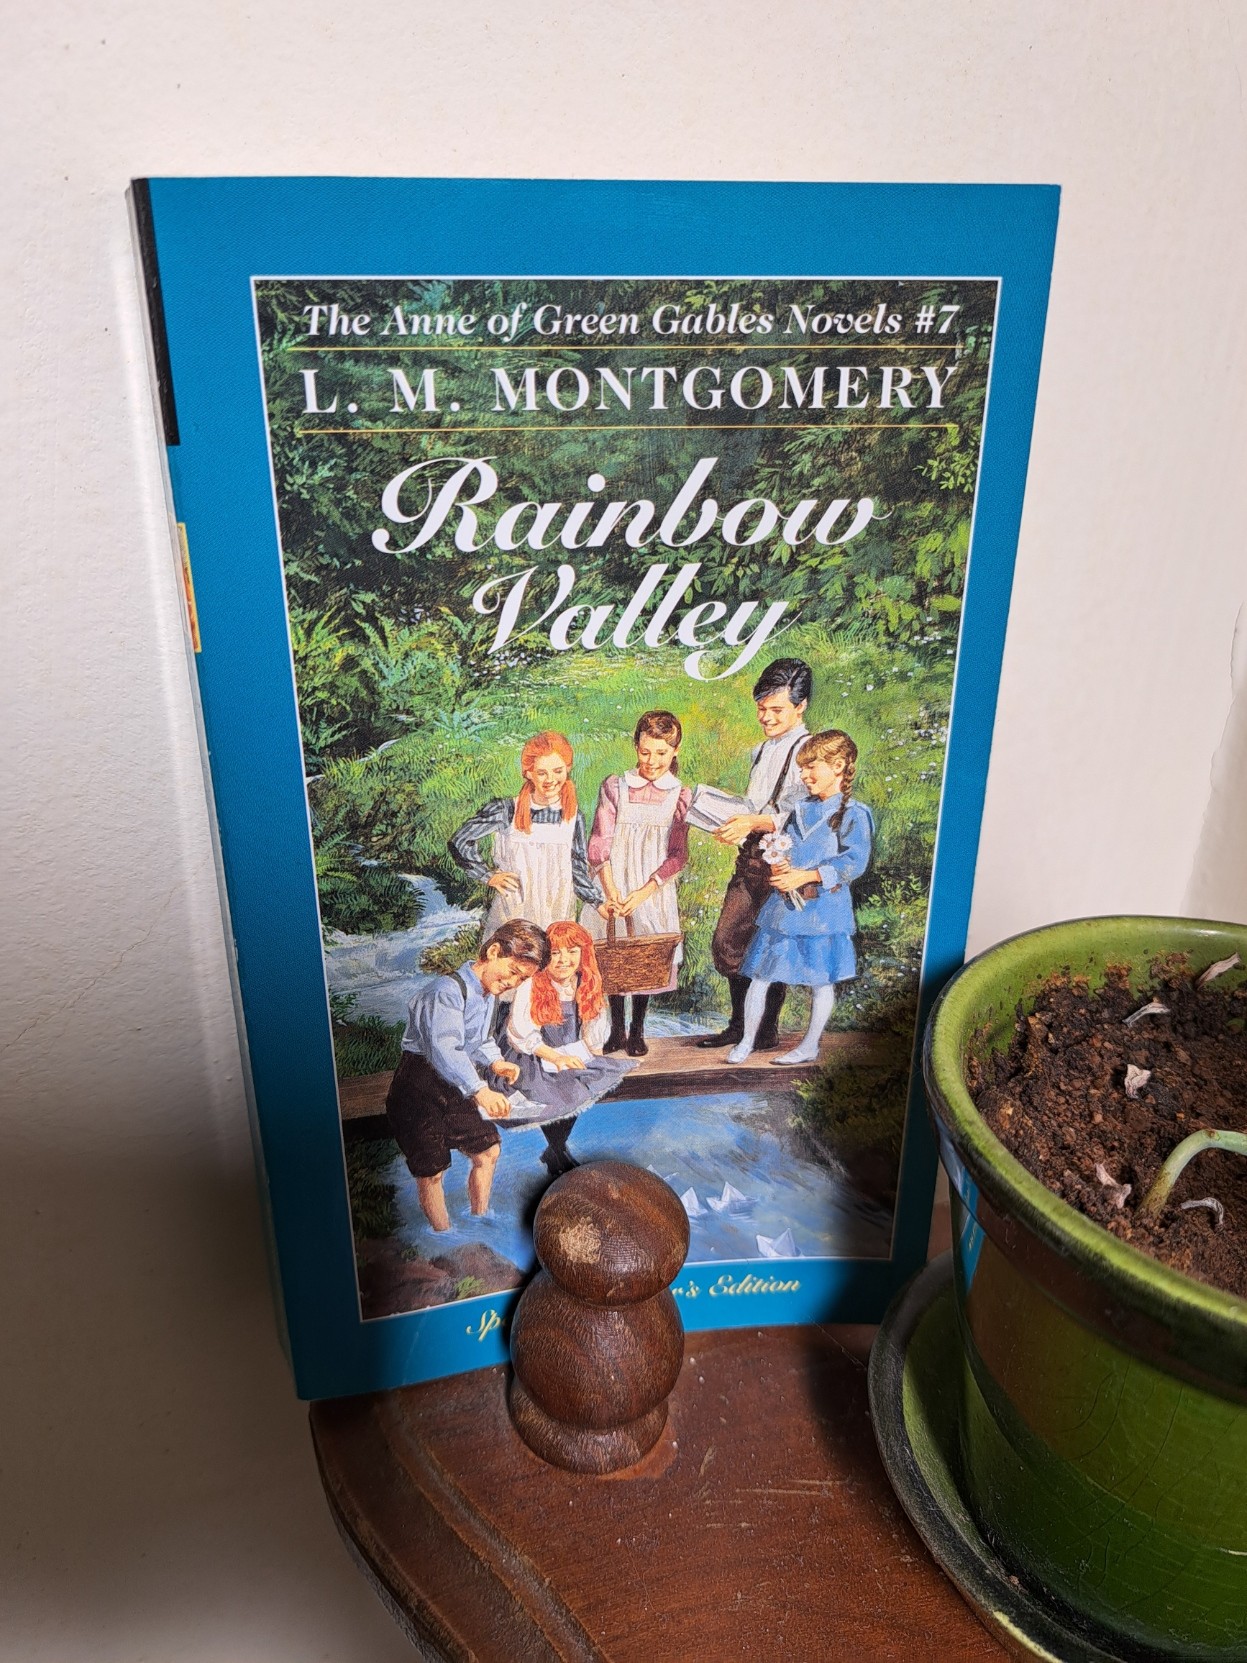 Rainbow Valley, The Anne of Green Gables Novels #7. No Anne on the cover. Instead, we see a bunch of kids (about whom this book is all about, not Anne).